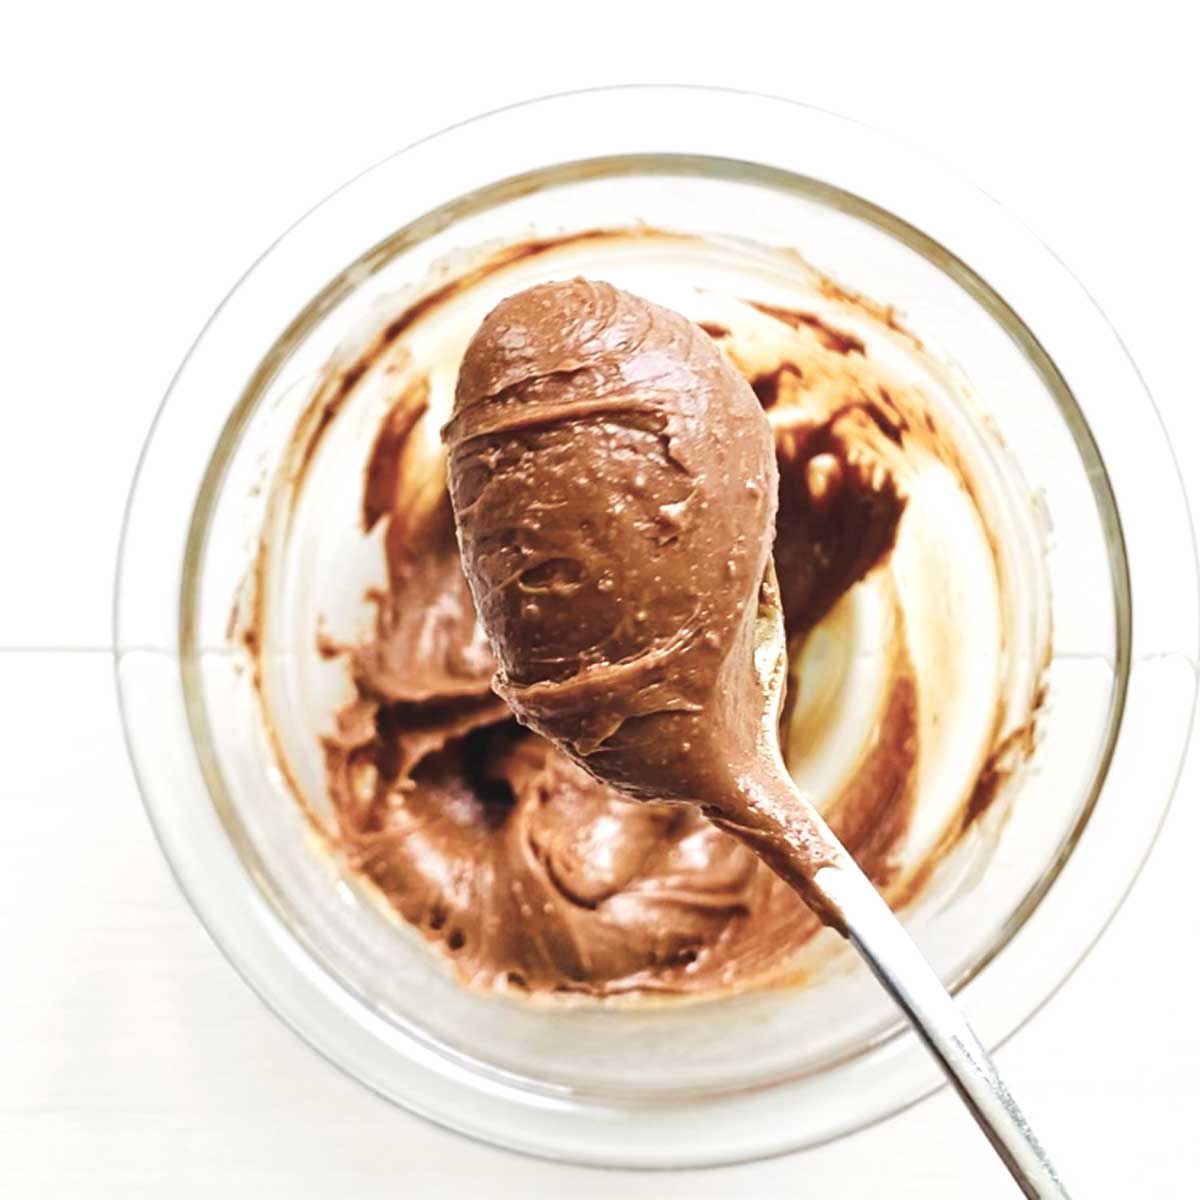 High Protein Nutella Frosting Made with PB2 Almond Butter Powder